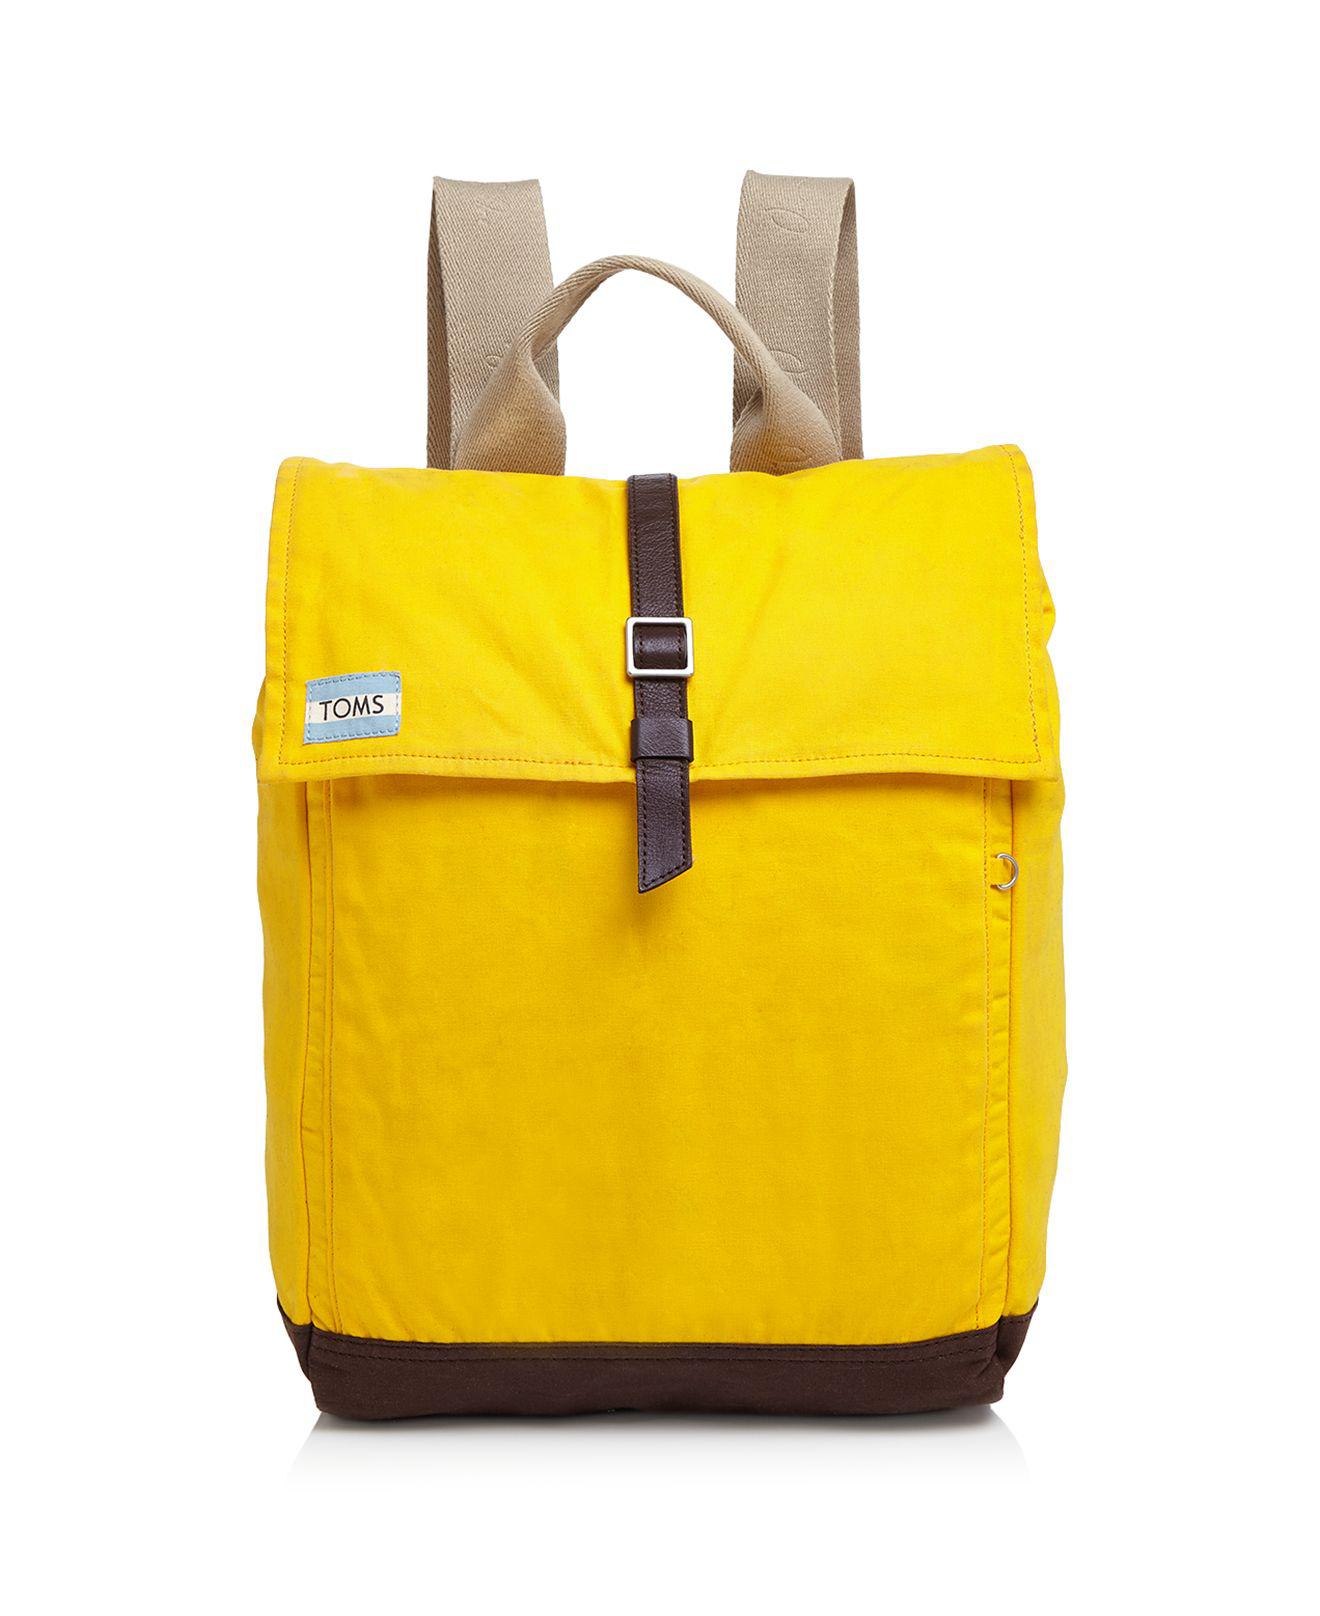 TOMS Citrus Utility Canvas Trekker Backpack in Yellow | Lyst